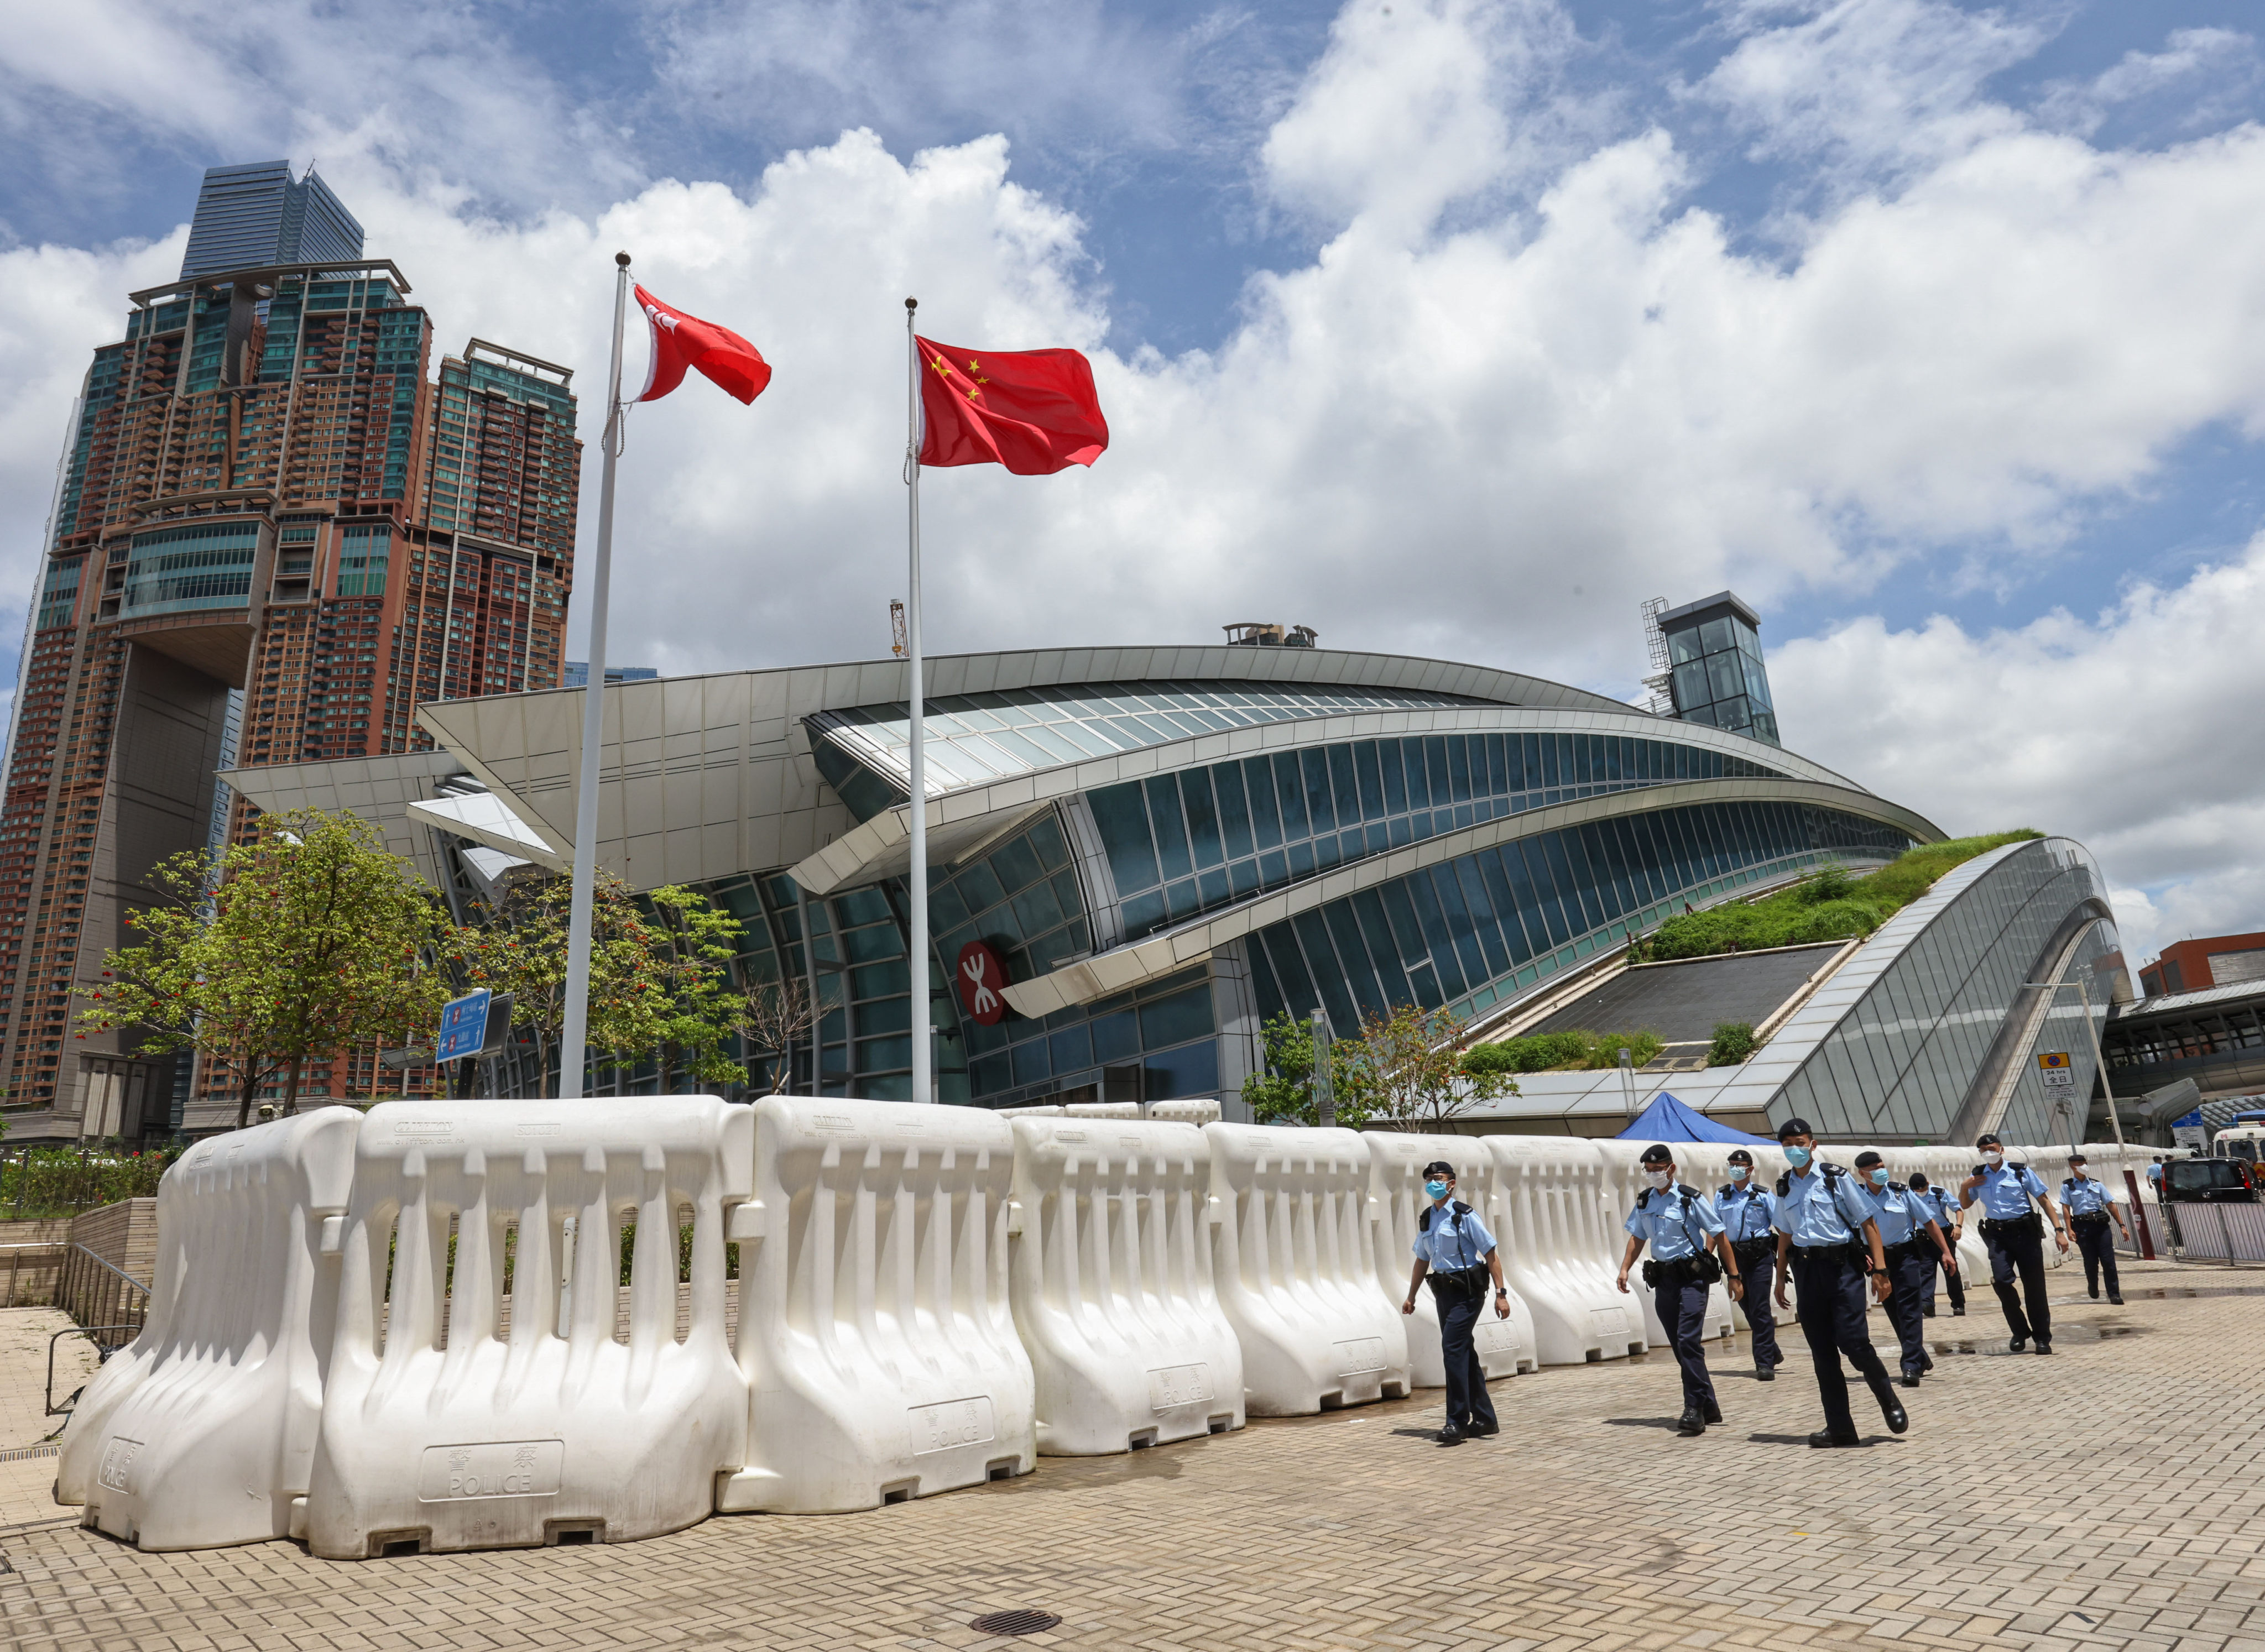 President Xi Jinping is expected to arrive at the high-speed railway terminus in West Kowloon on Thursday. Photo: K. Y. Cheng